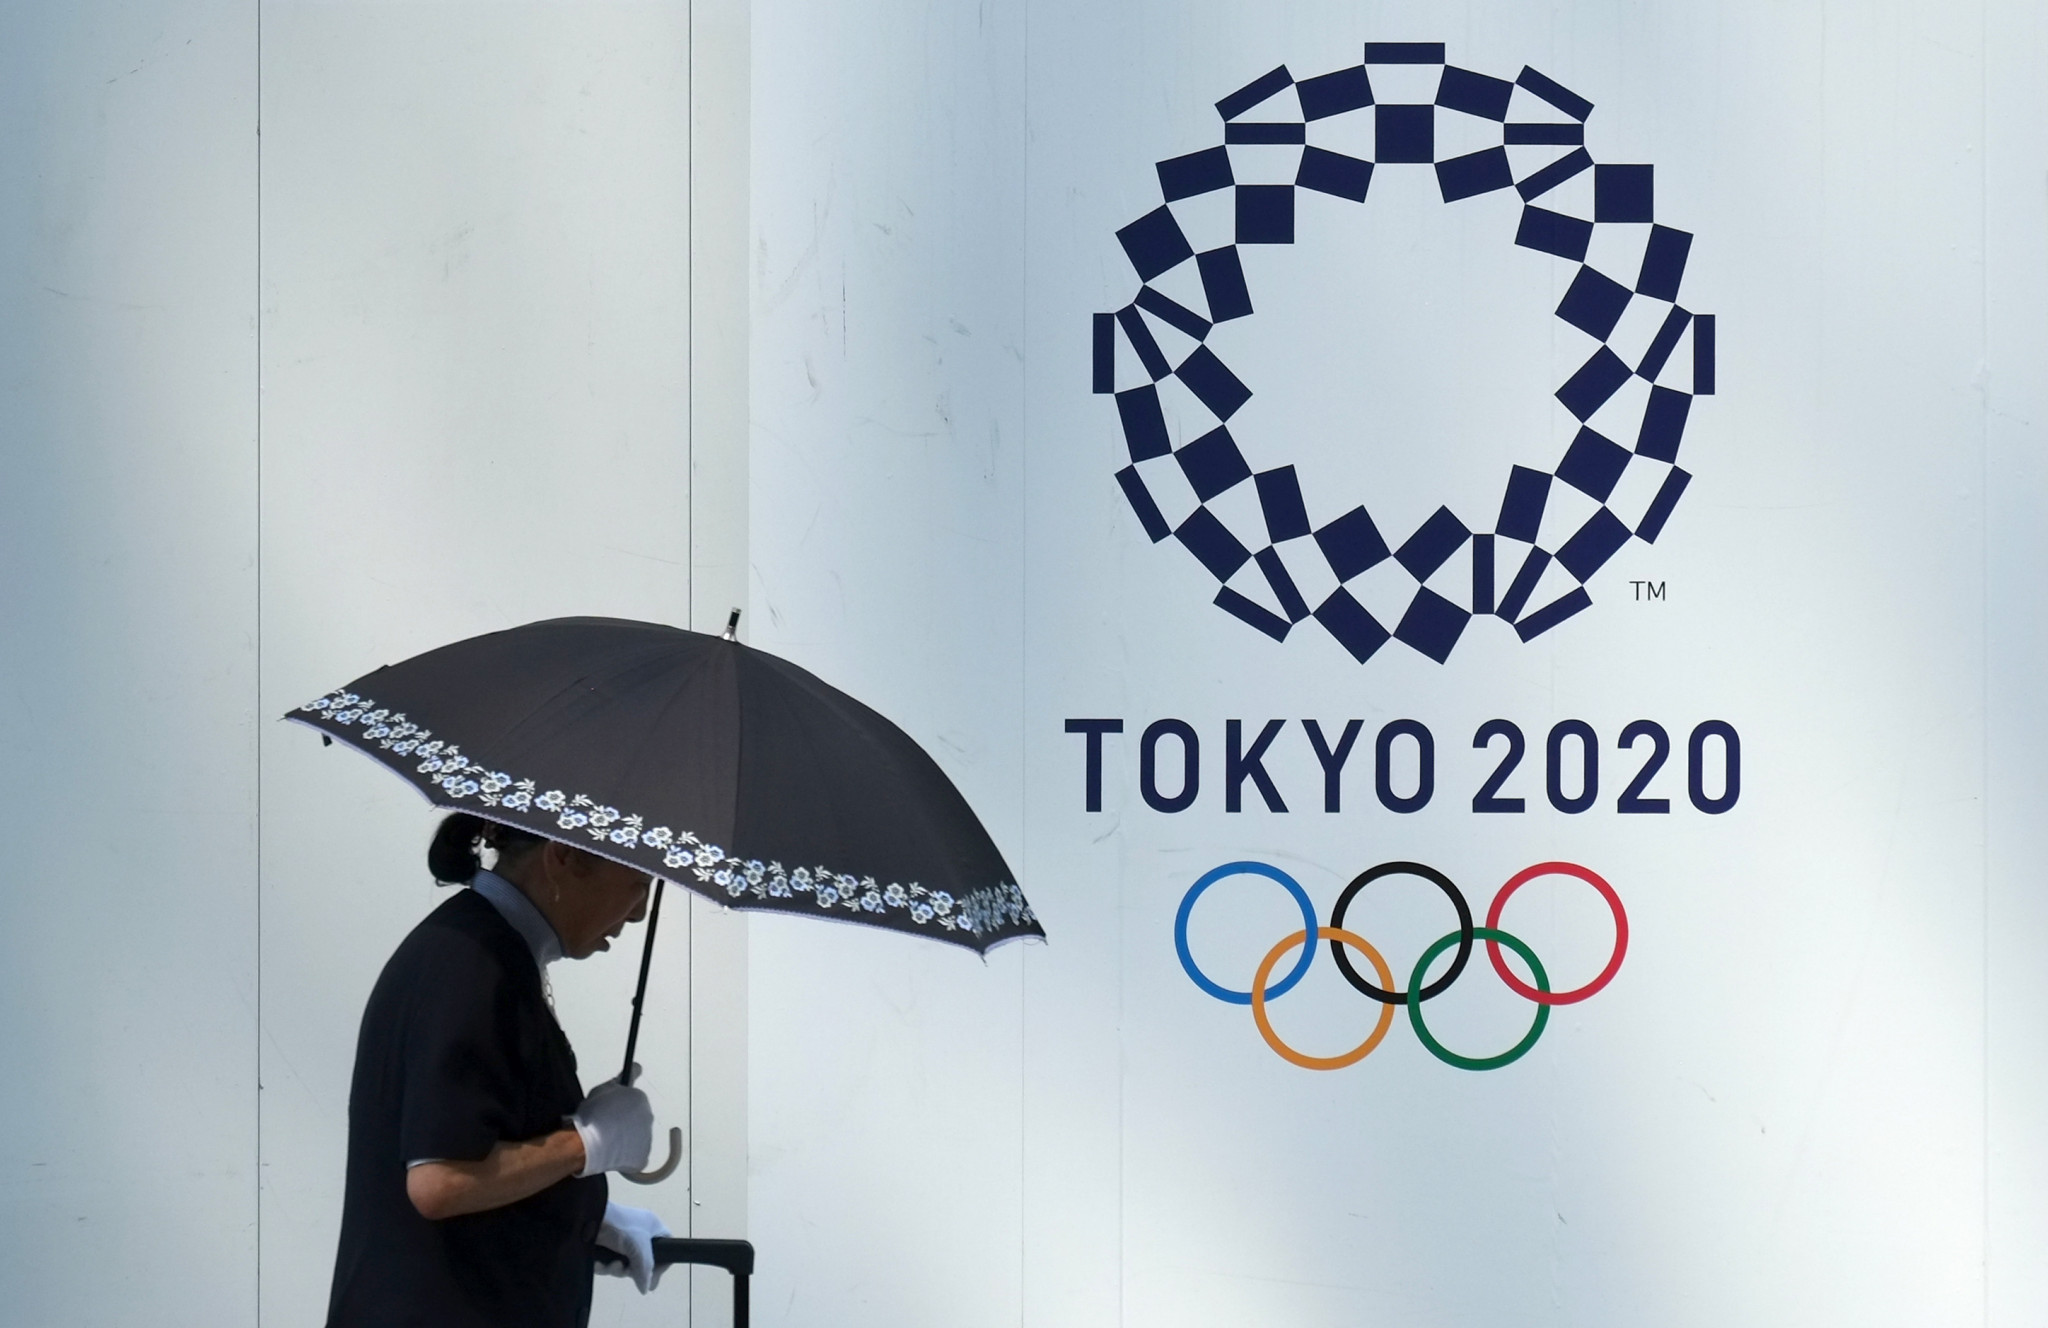 Tokyo 2020 are expected to reveal their ticket prices later this month ©Getty Images